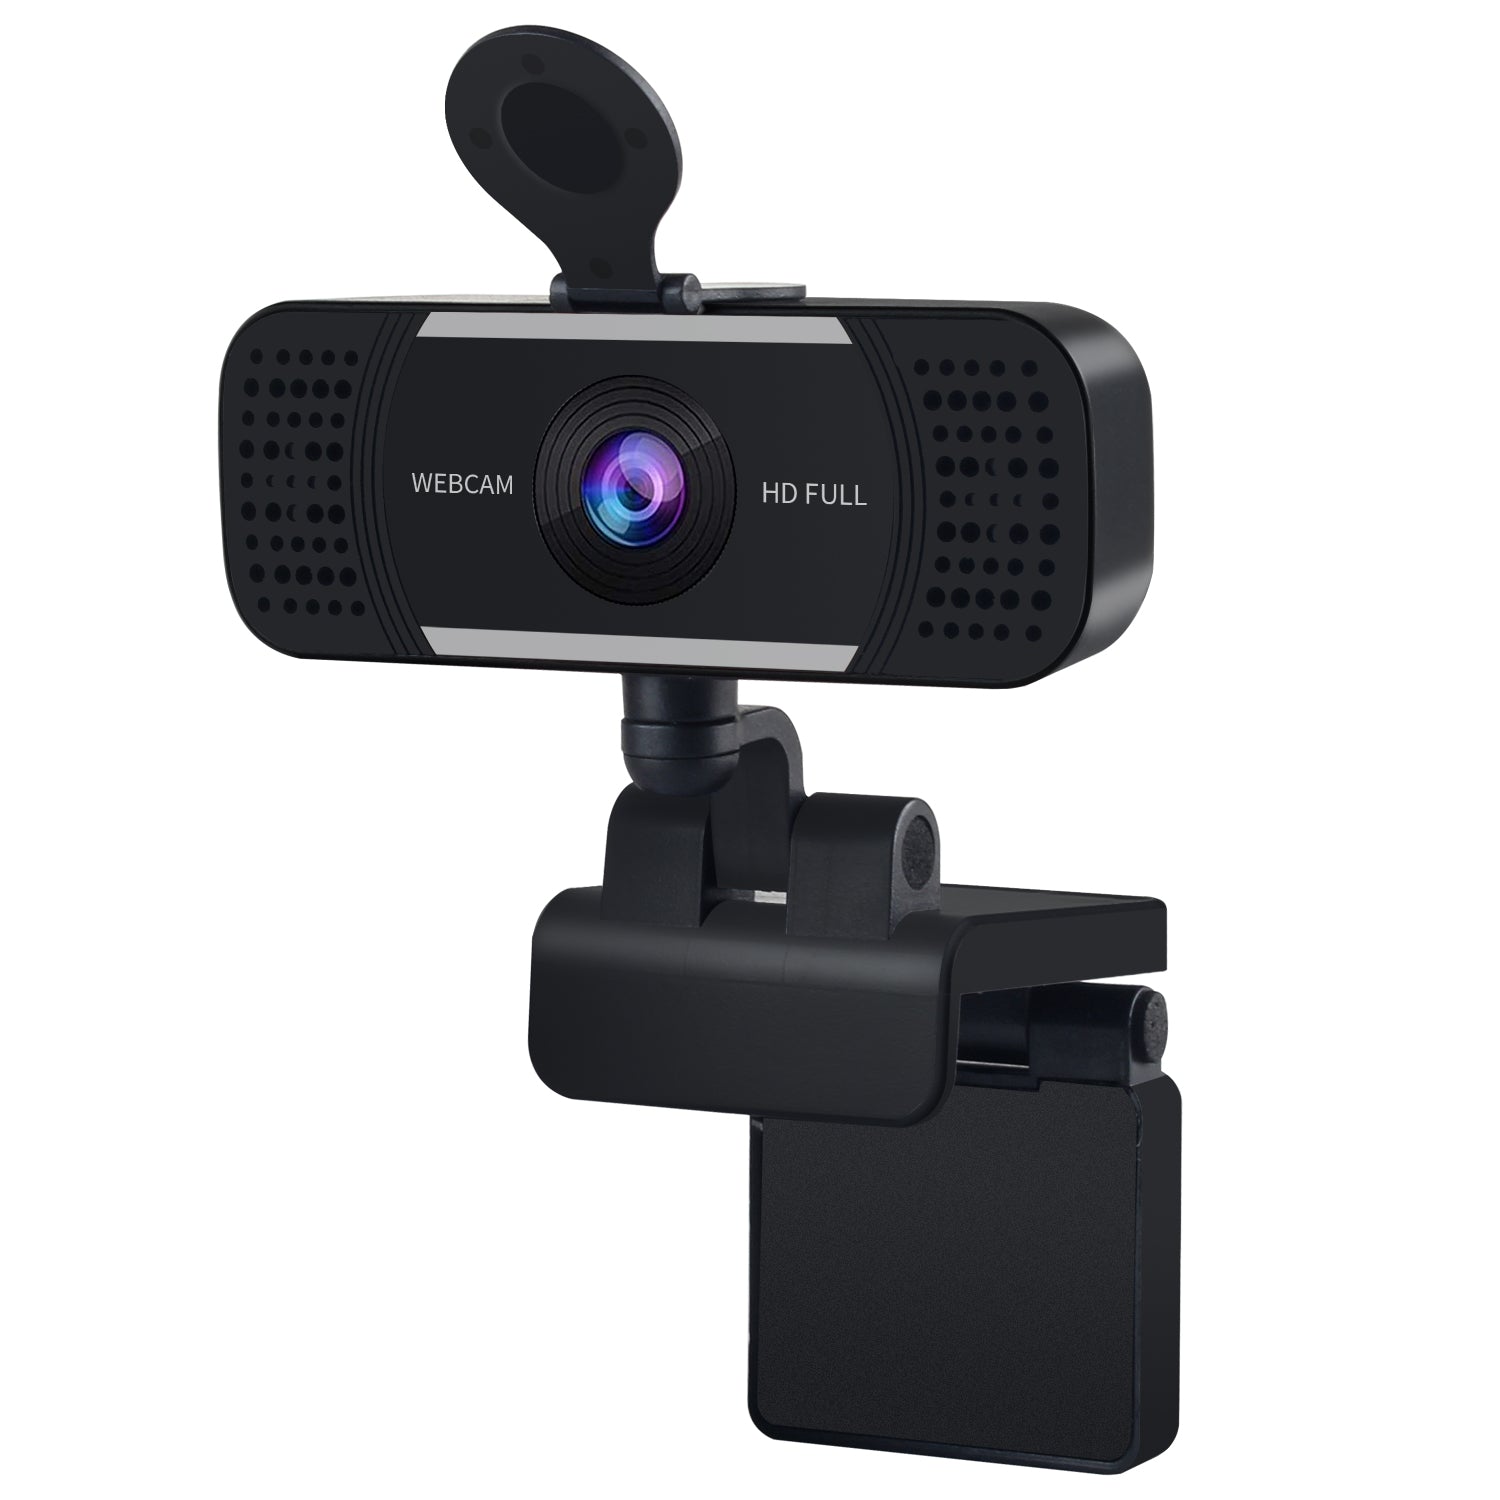 1080P Web Camera, HD Webcam with Microphone & Privacy Cover, 110-degree Wide Angle, Plug and Play